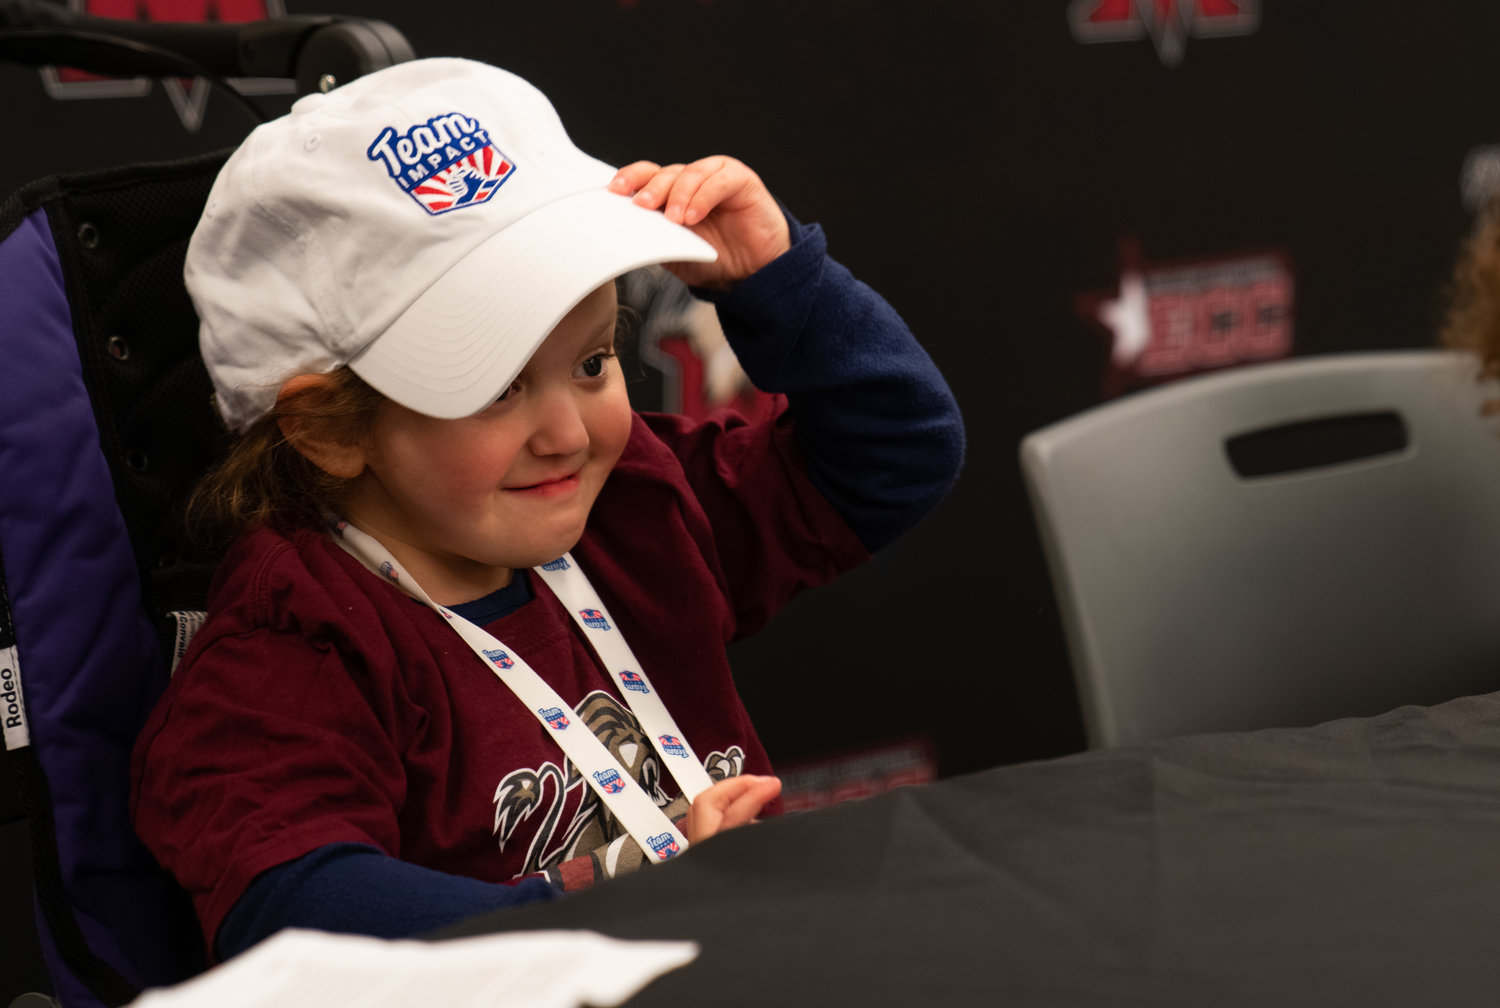 Five-year-old Penelope DiChiara signed on to Molloy’s softball team.